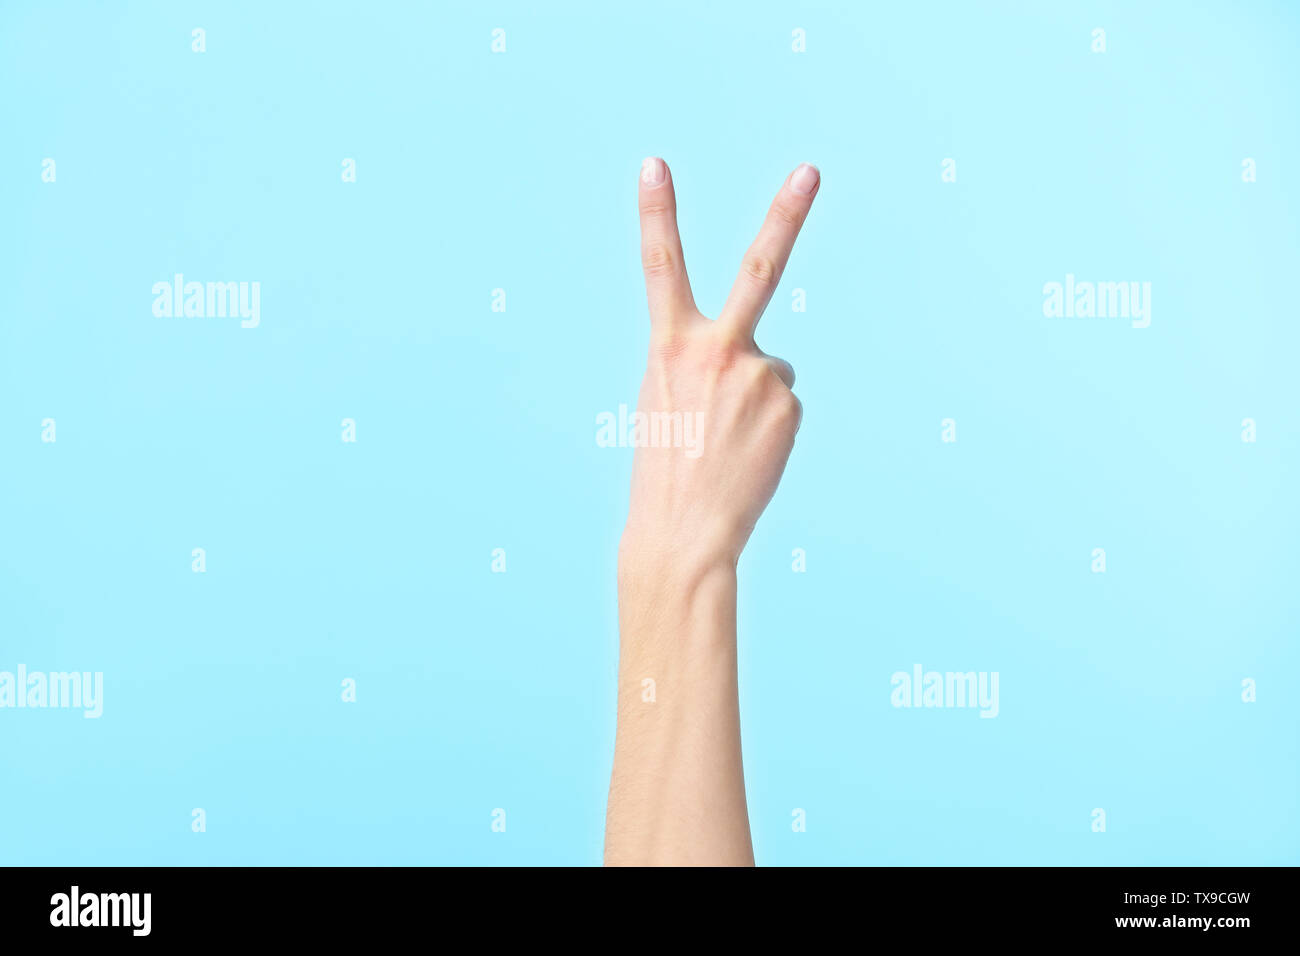 human hand showing number two, isolated on blue background Stock Photo